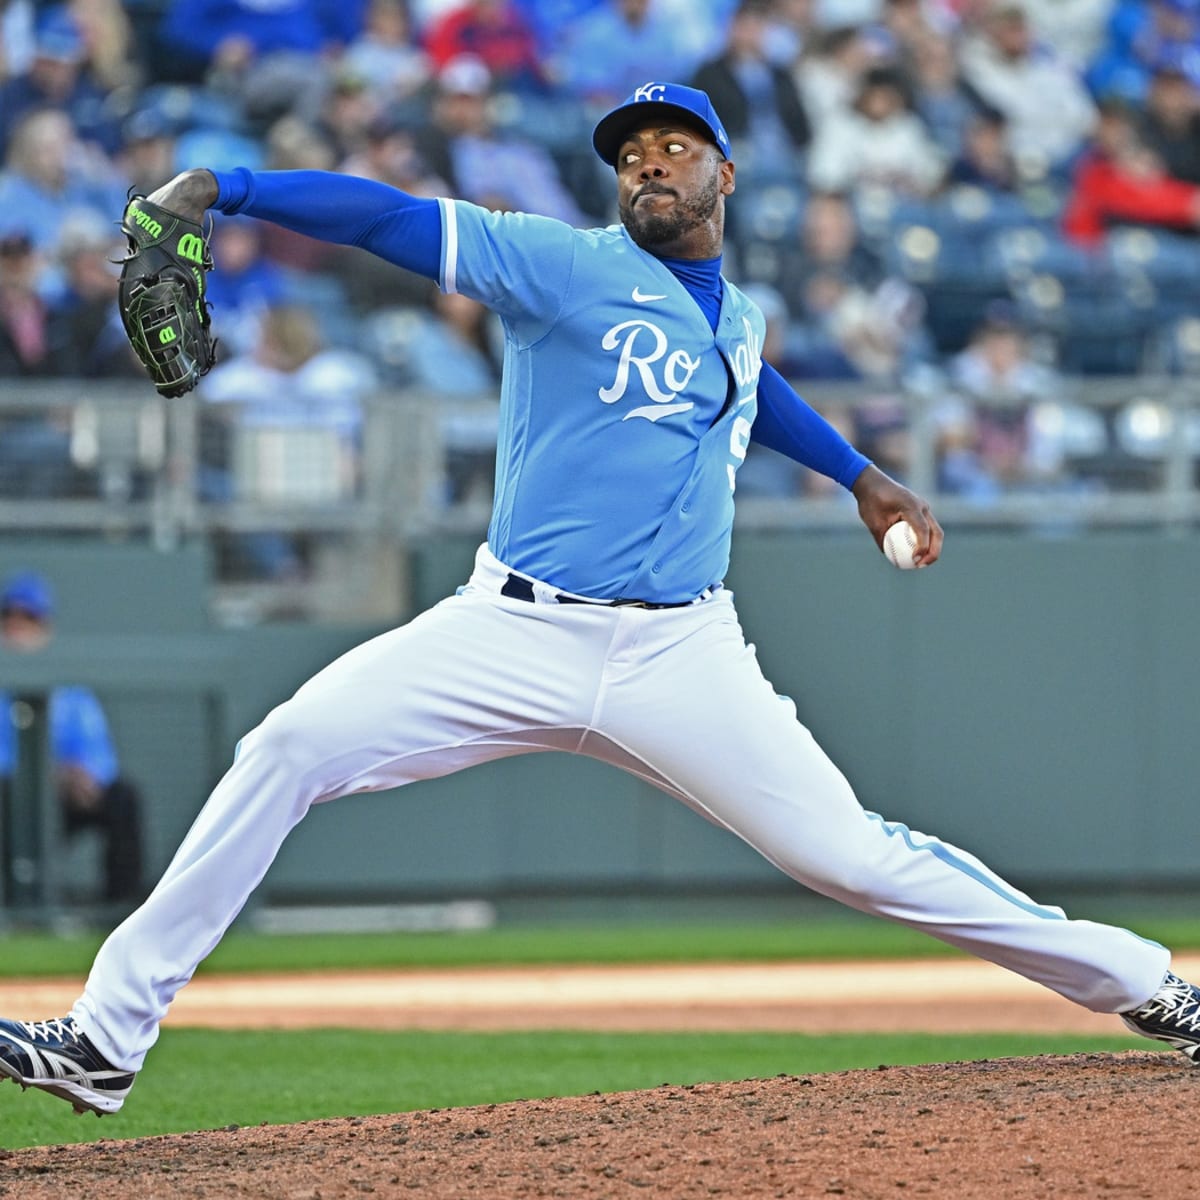 Royals sign left-handed pitcher Aroldis Chapman to 1-year contract